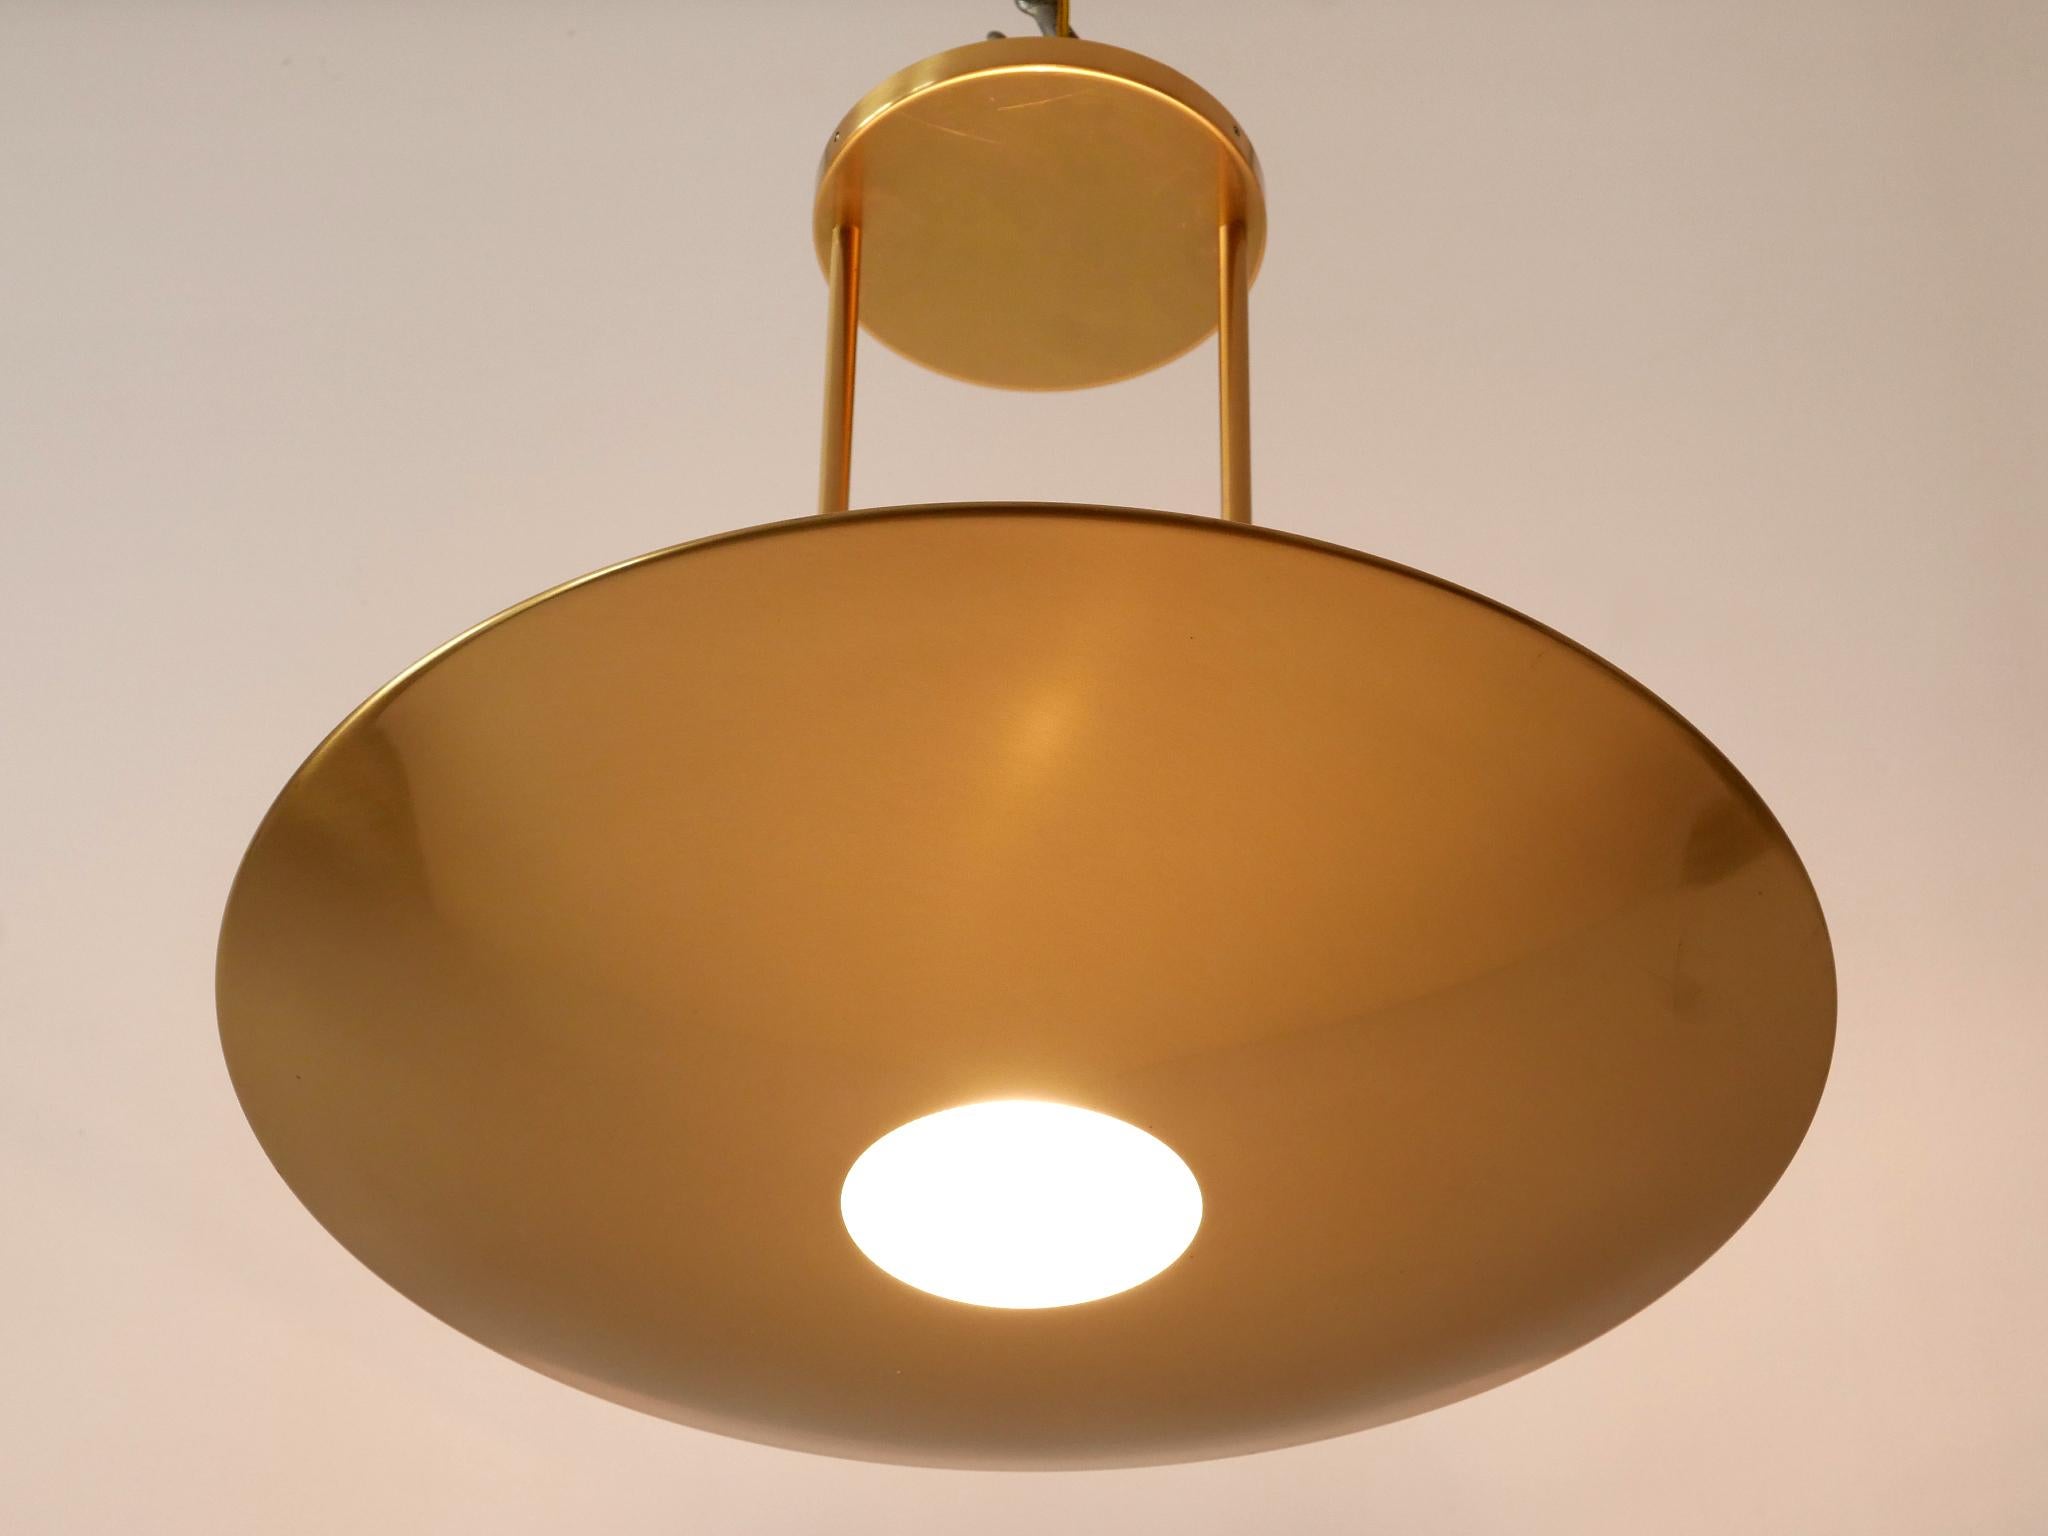 Elegant and minimalist brass pendant lamp / ceiling fixture. Designed & manufactured by Florian Schulz, Germany, 1980s.

Executed in polished brass and glass, the pendant lamp needs a halogen bulb R7, is wired and in working condition. It runs both